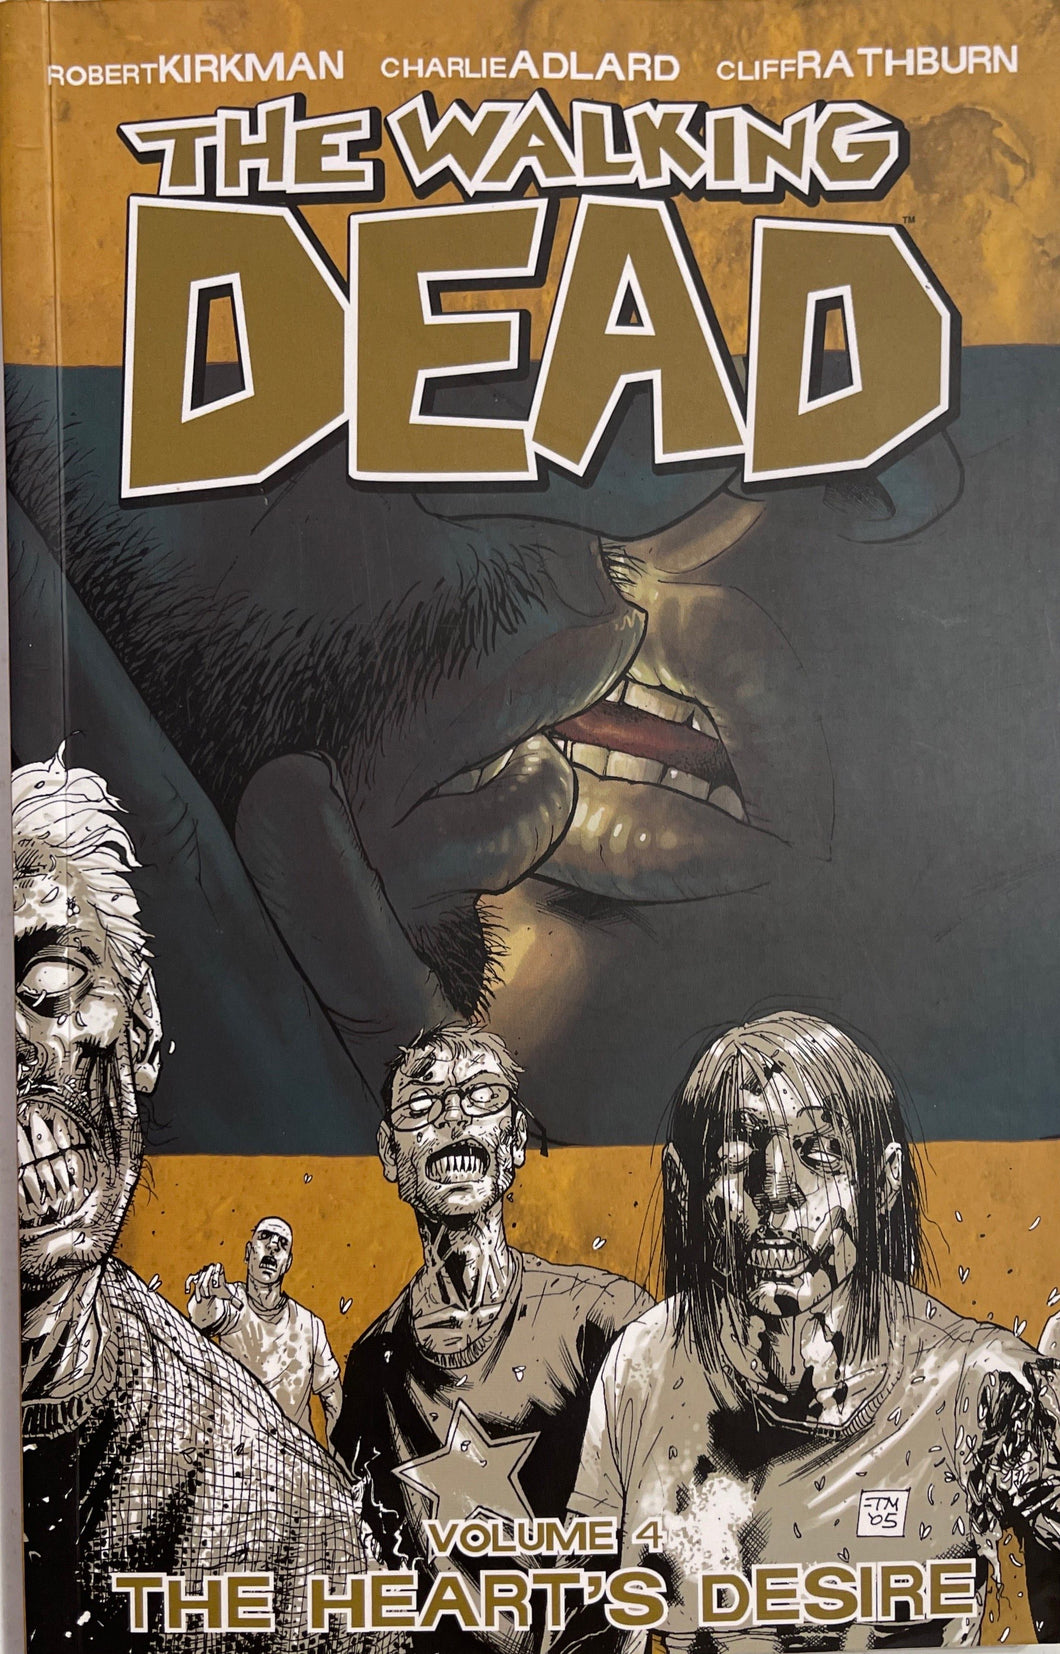 The Walking Dead Volume 4: The Heart's Desire Soft Cover Graphic Novel